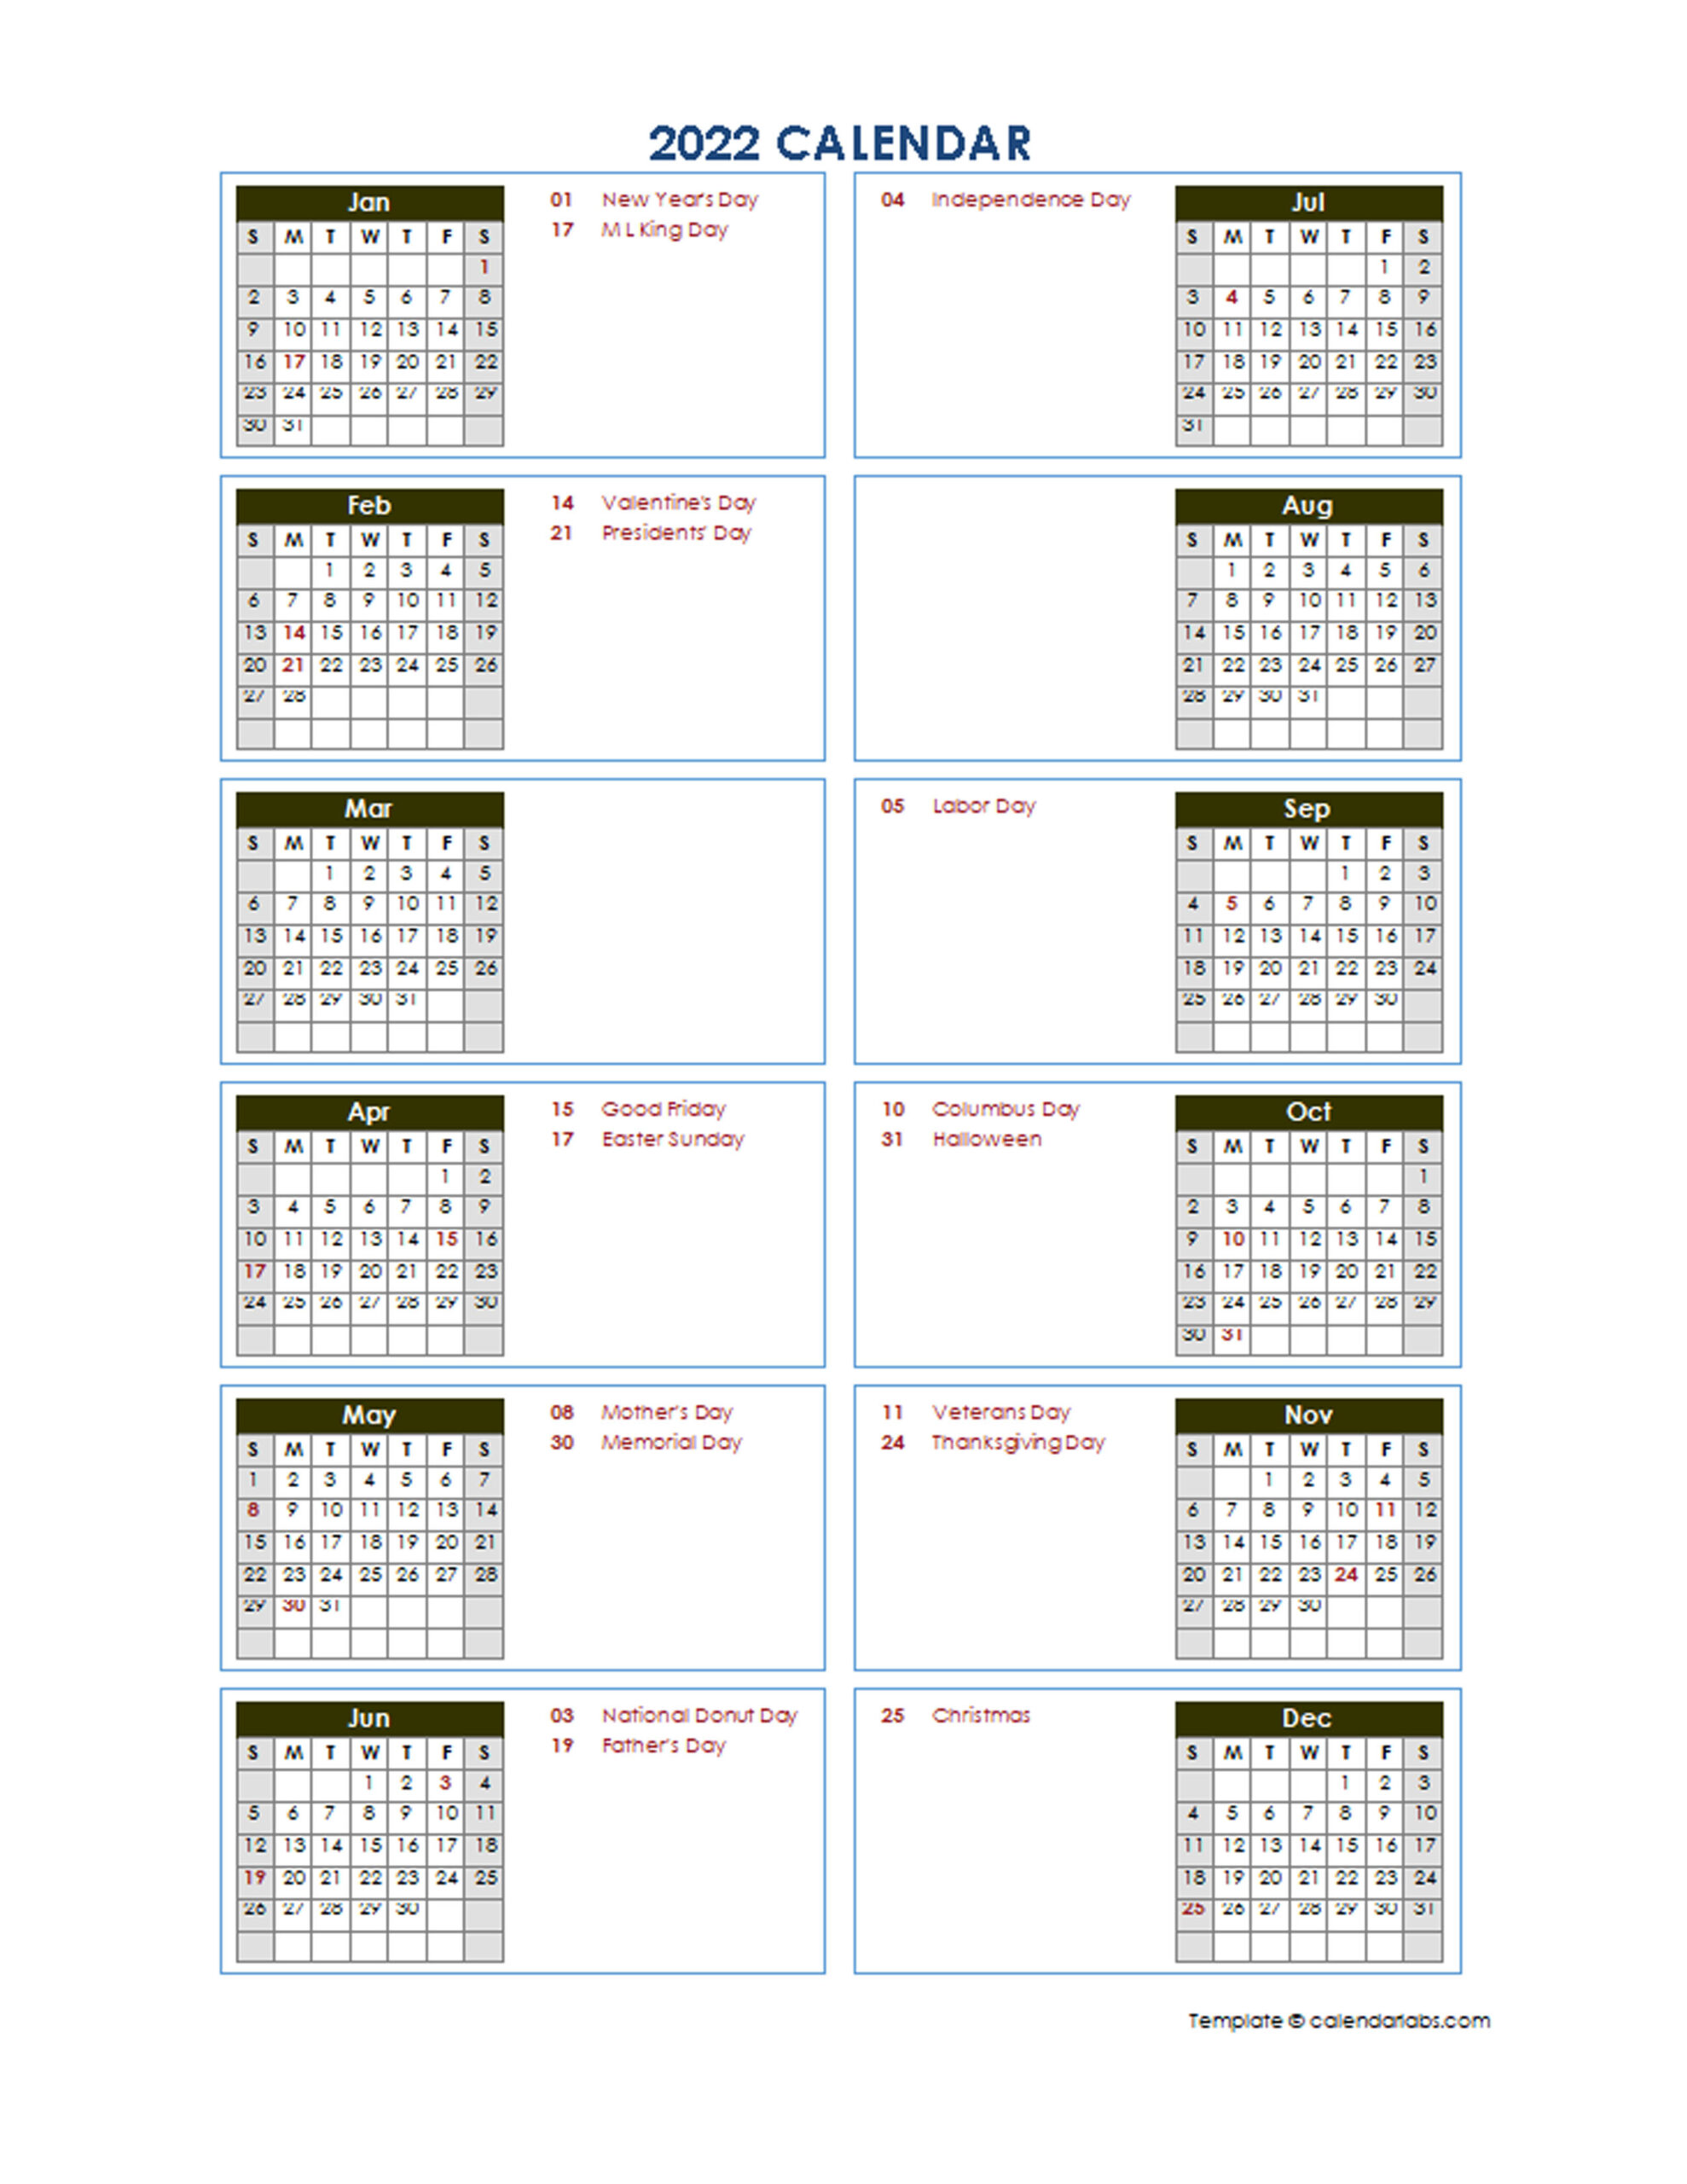 2022 Yearly Calendar Template Vertical Design  Free Printable Templates pertaining to Printable 2022 Calendar One Page